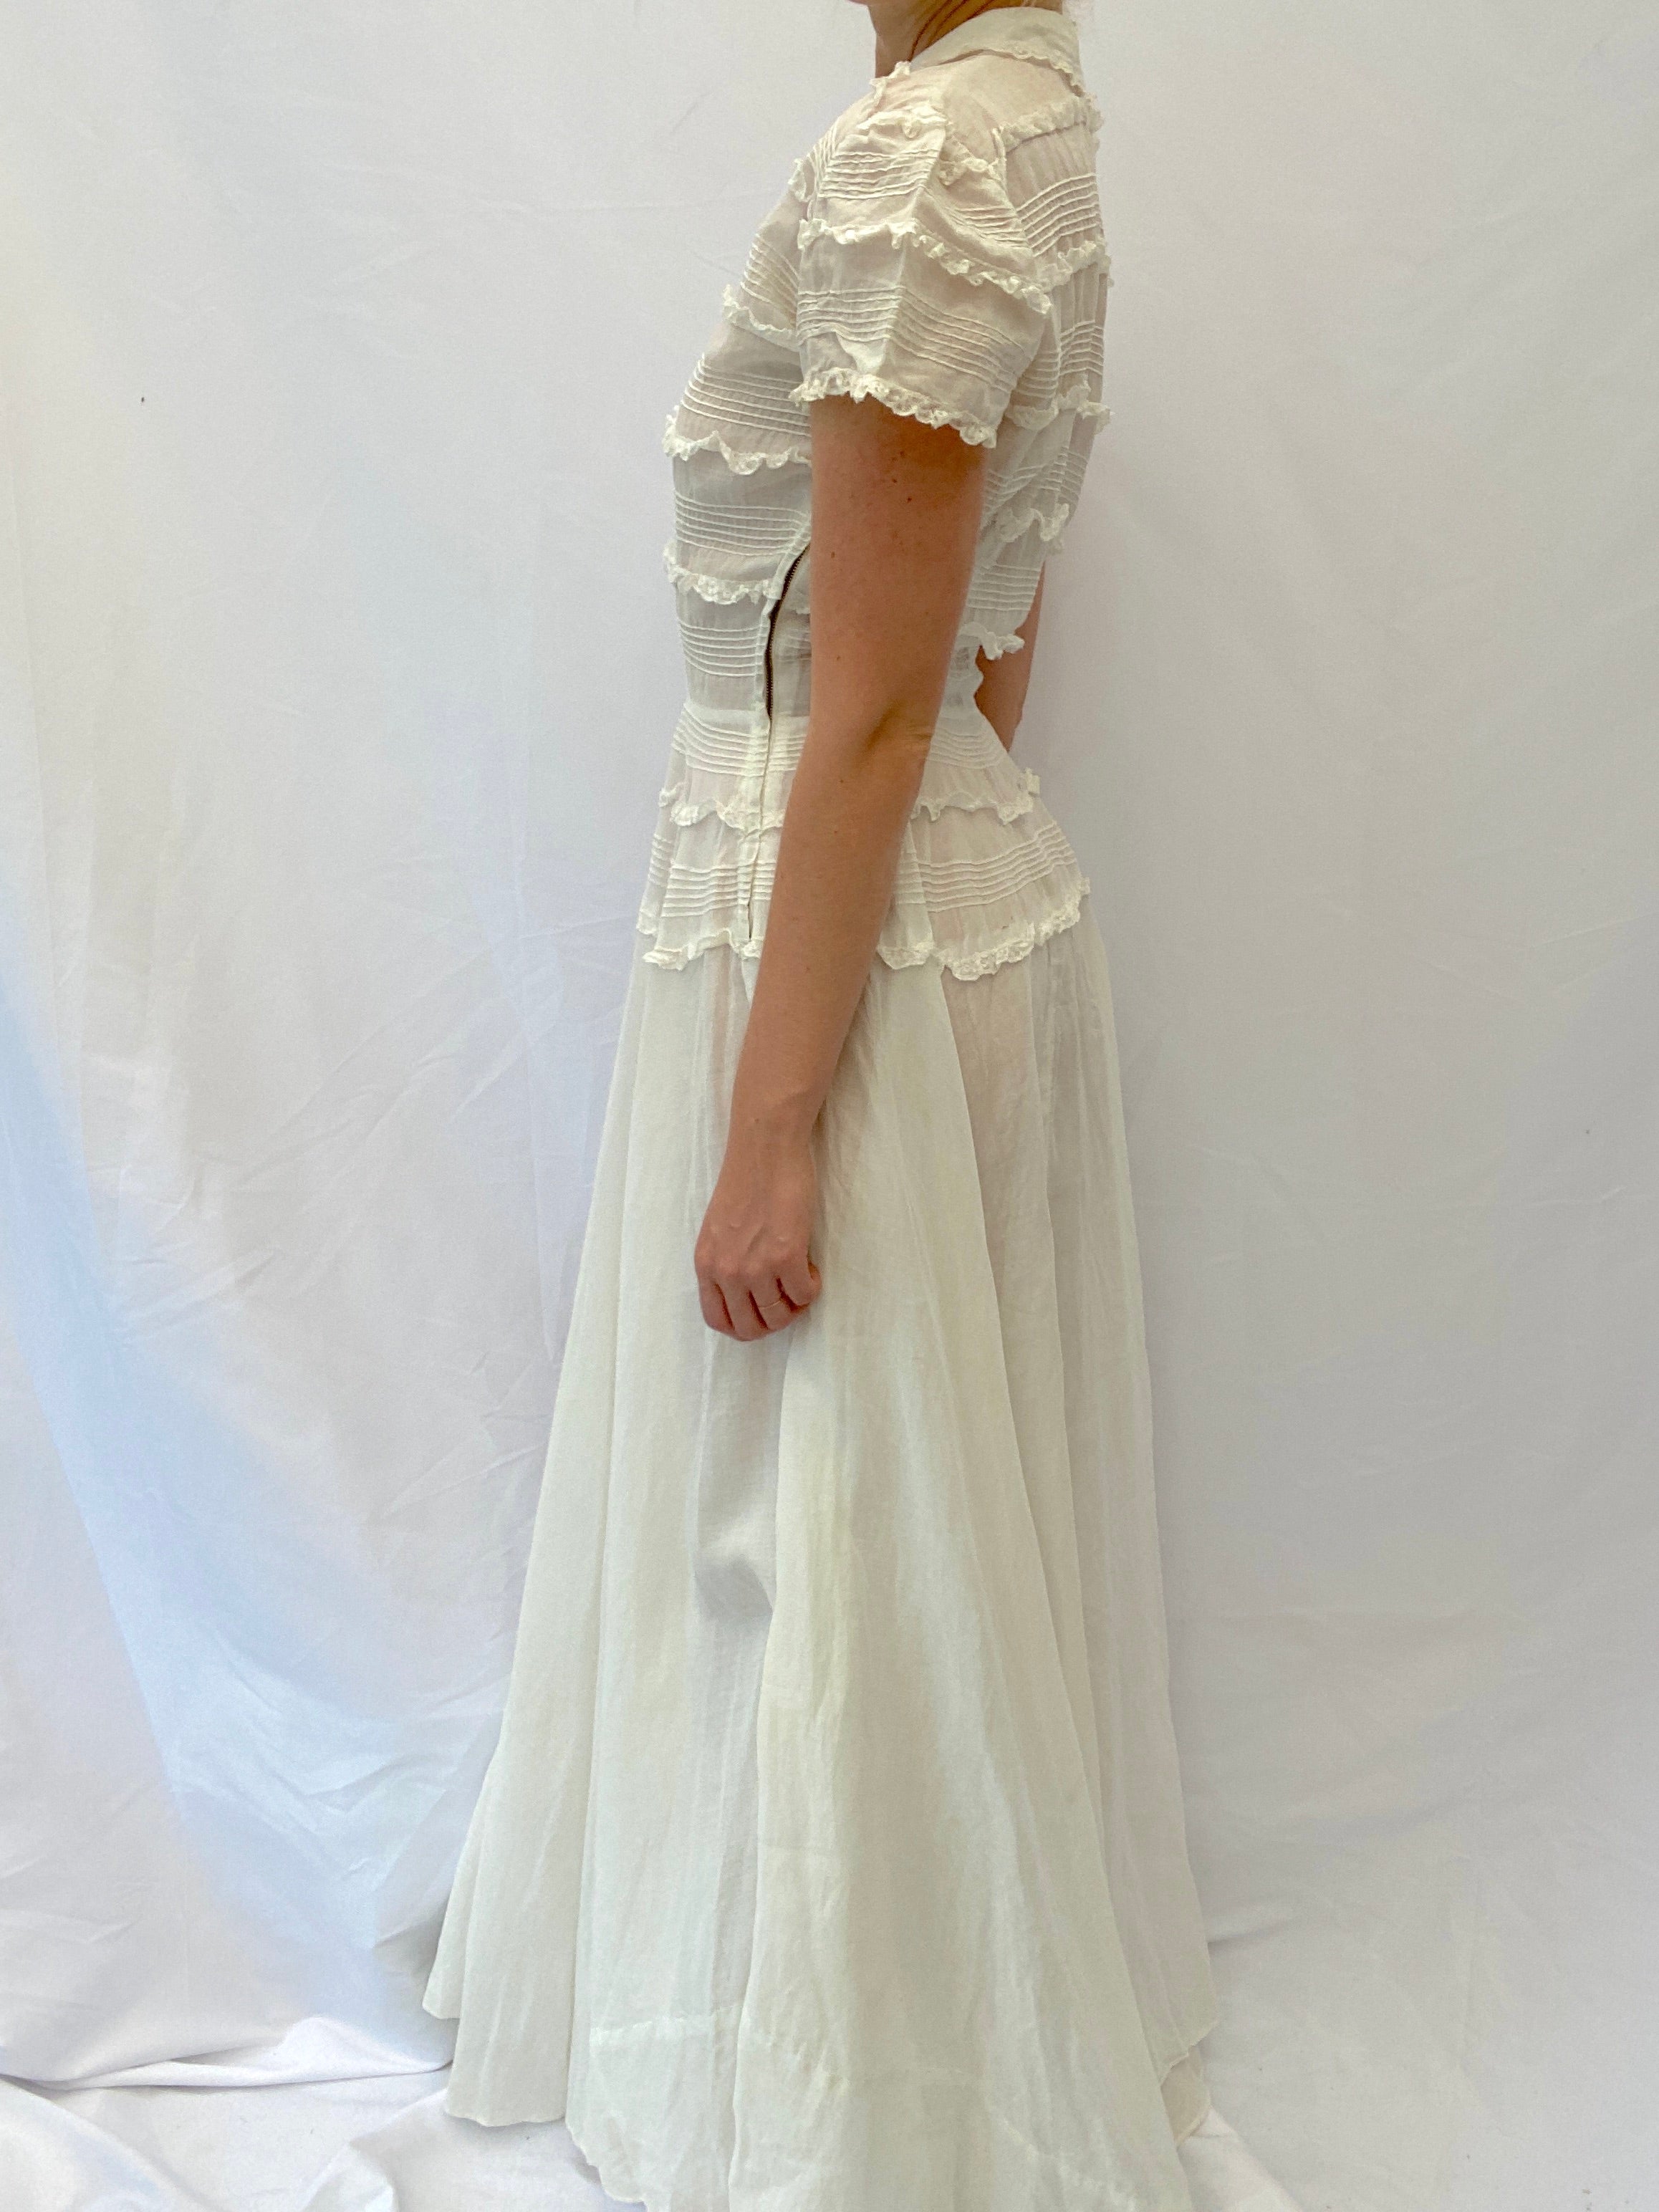 1940's White Cotton Dress with Lace Ruffles and Cap Sleeve